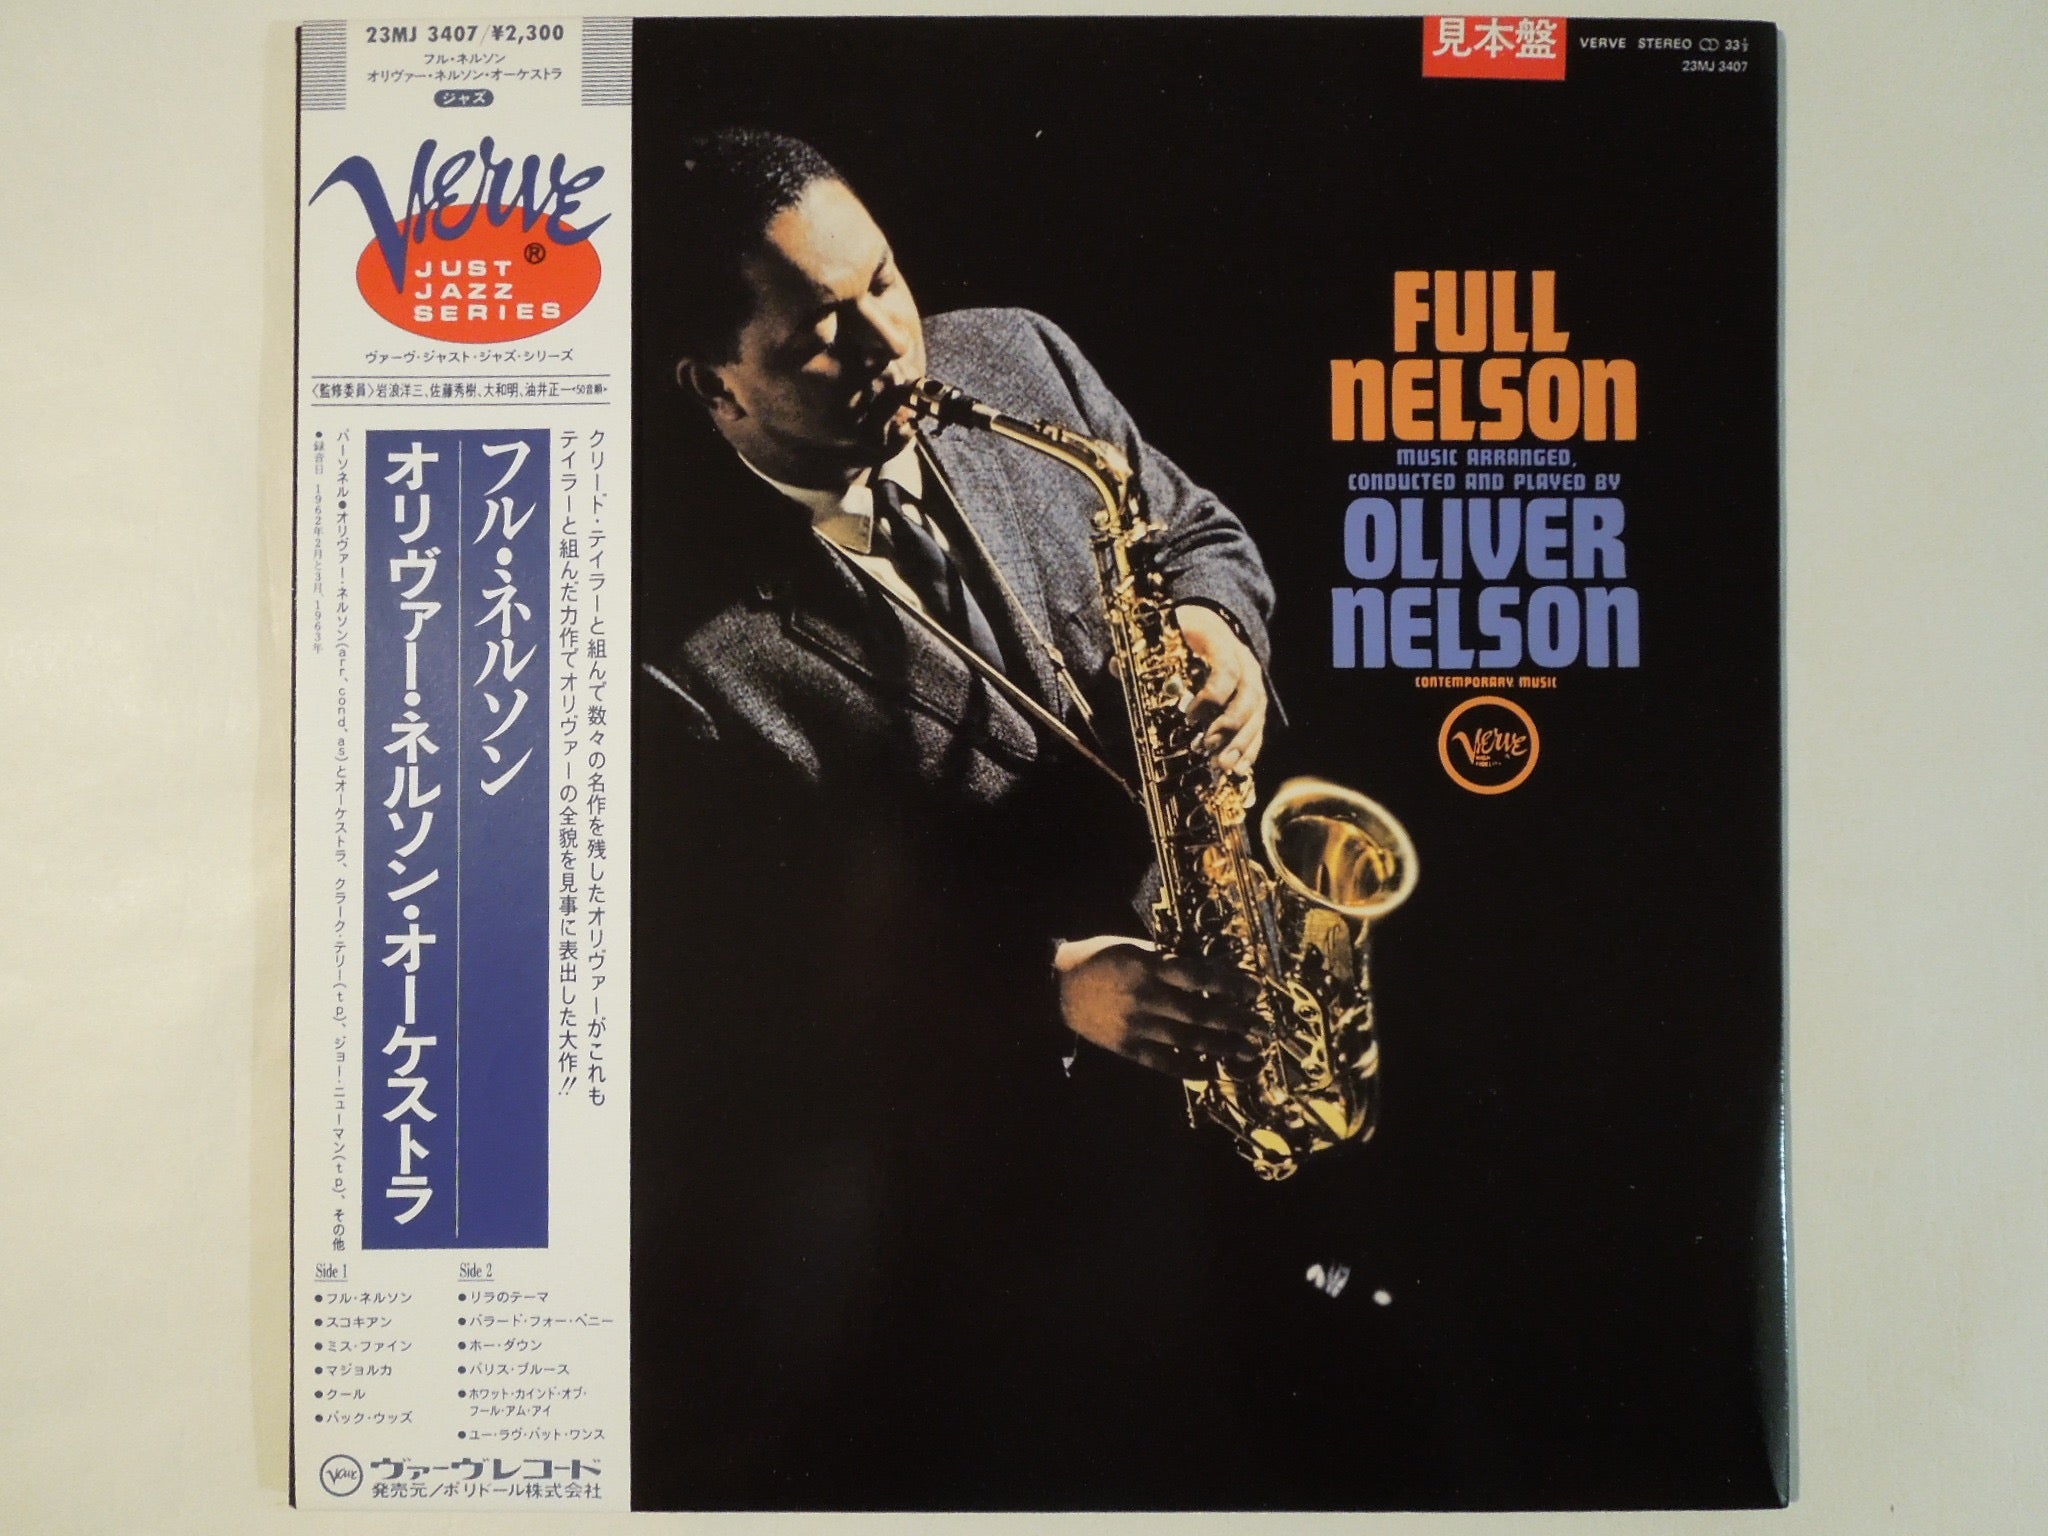 Oliver Nelson Full Nelson Gatefold Lp Vinyl Record Used Solidity Records